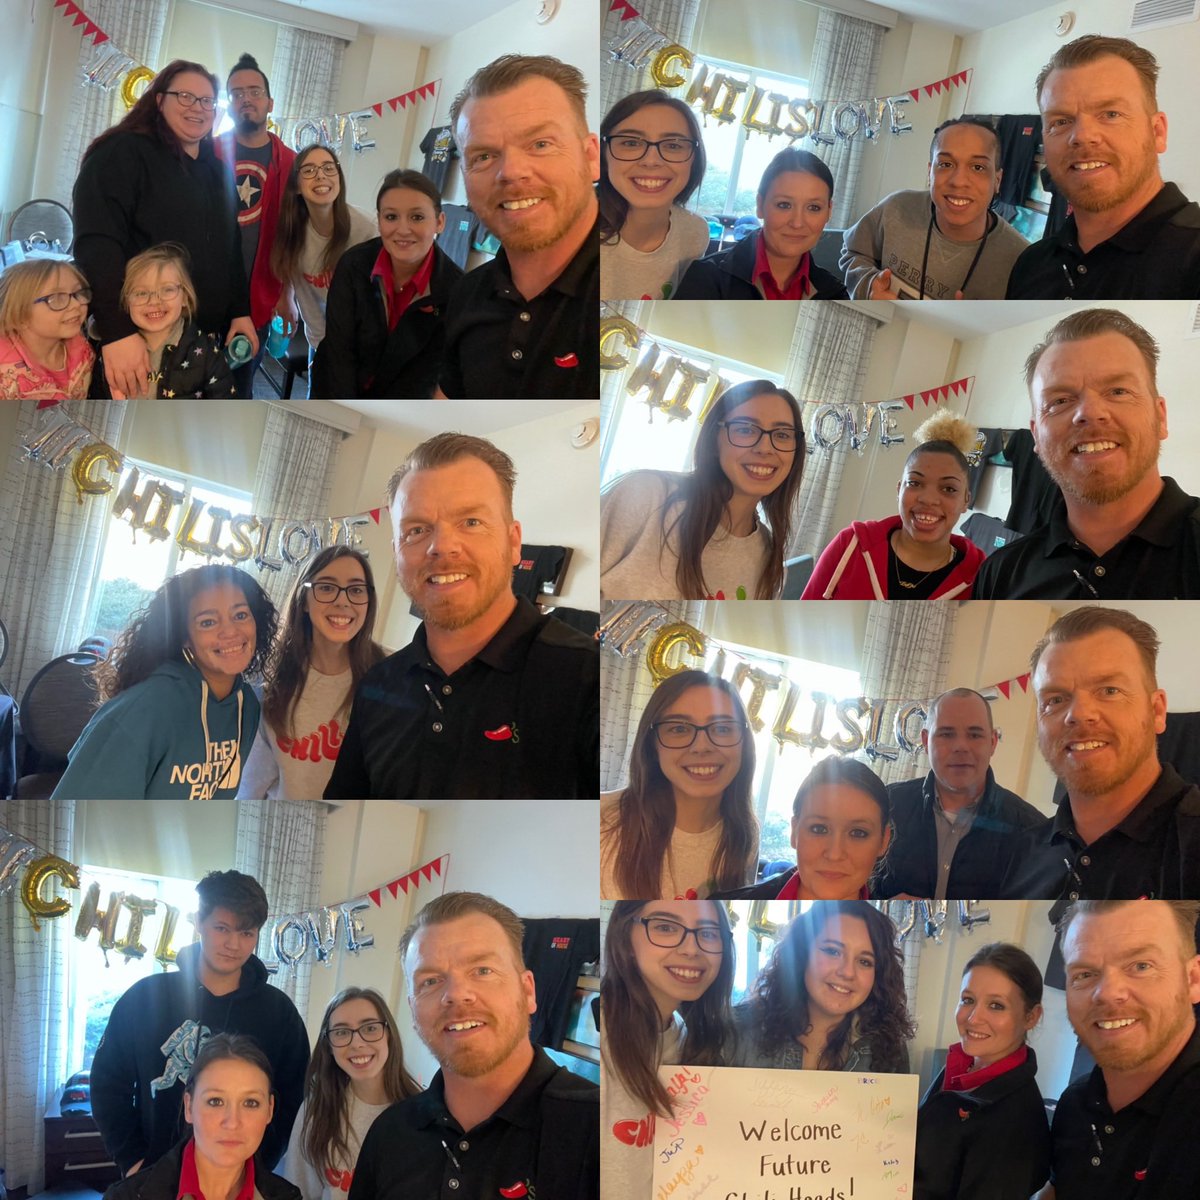 So happy to introduce our Avon team so far and can’t wait to see our team continue to grow. #TeamAvon #ChilisLove 🌶️❤️